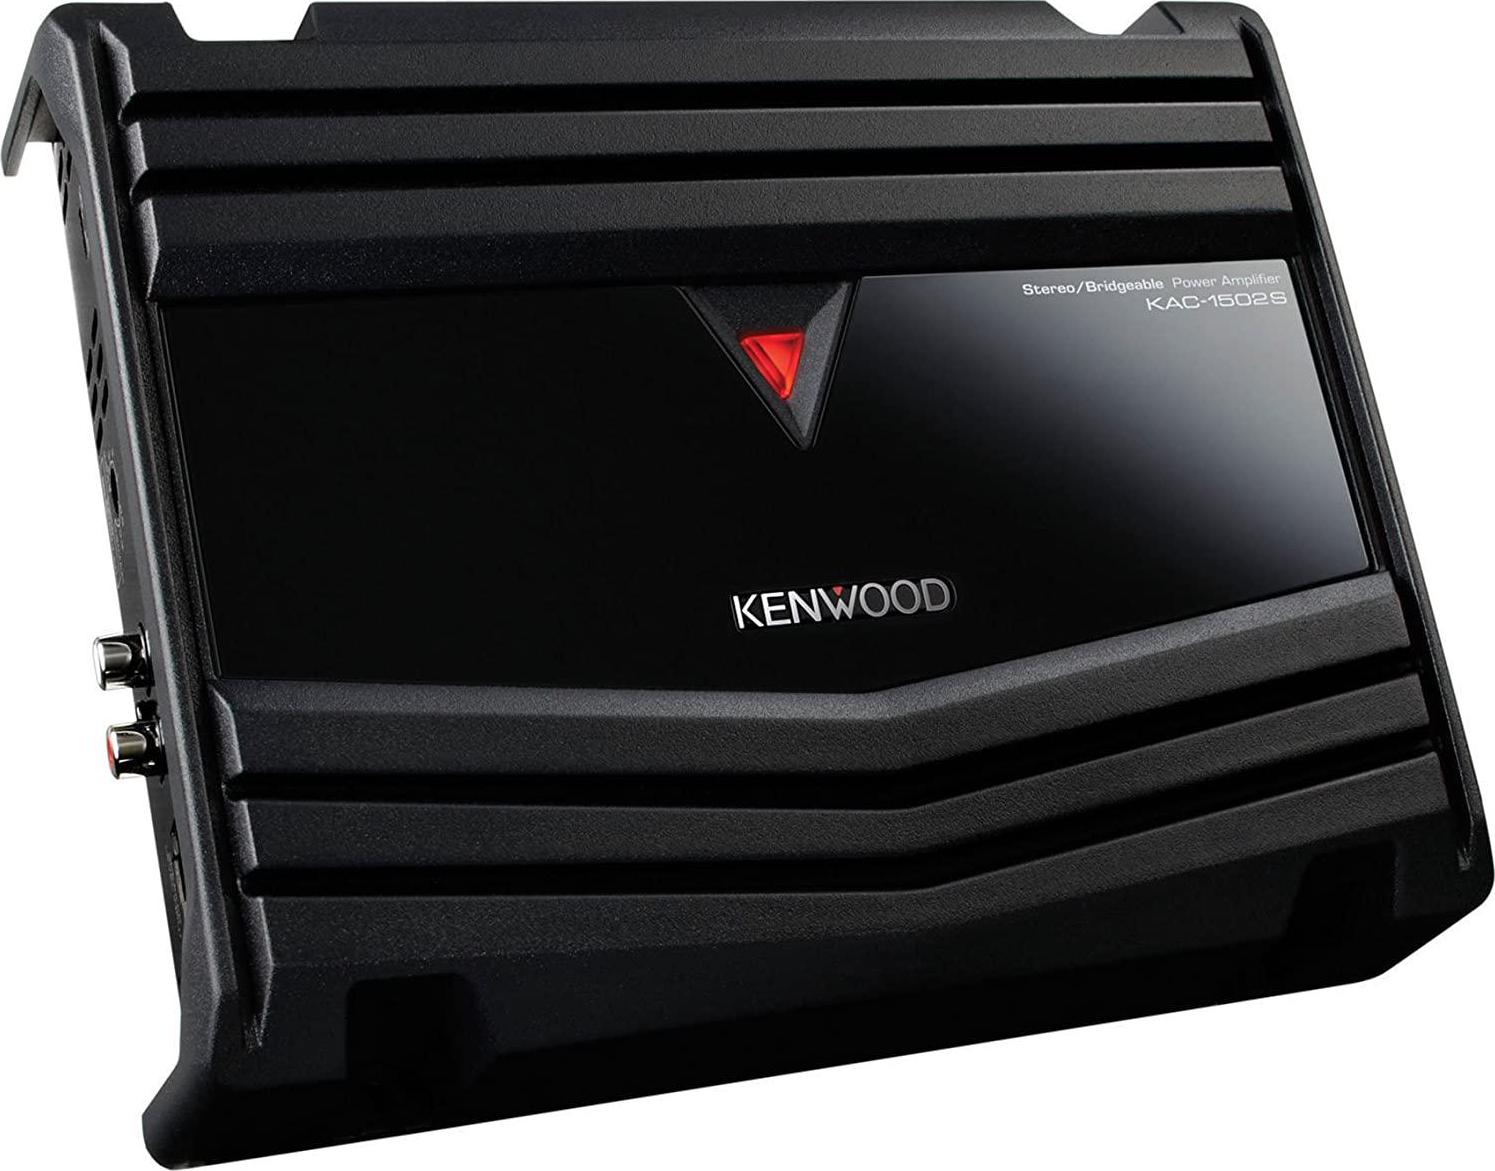 KENWOOD, Kenwood 500W 2 Channels Dual Performance Standard Series Stereo Power Car Amplifier with Gravity Magnet Phone Holder Bundle